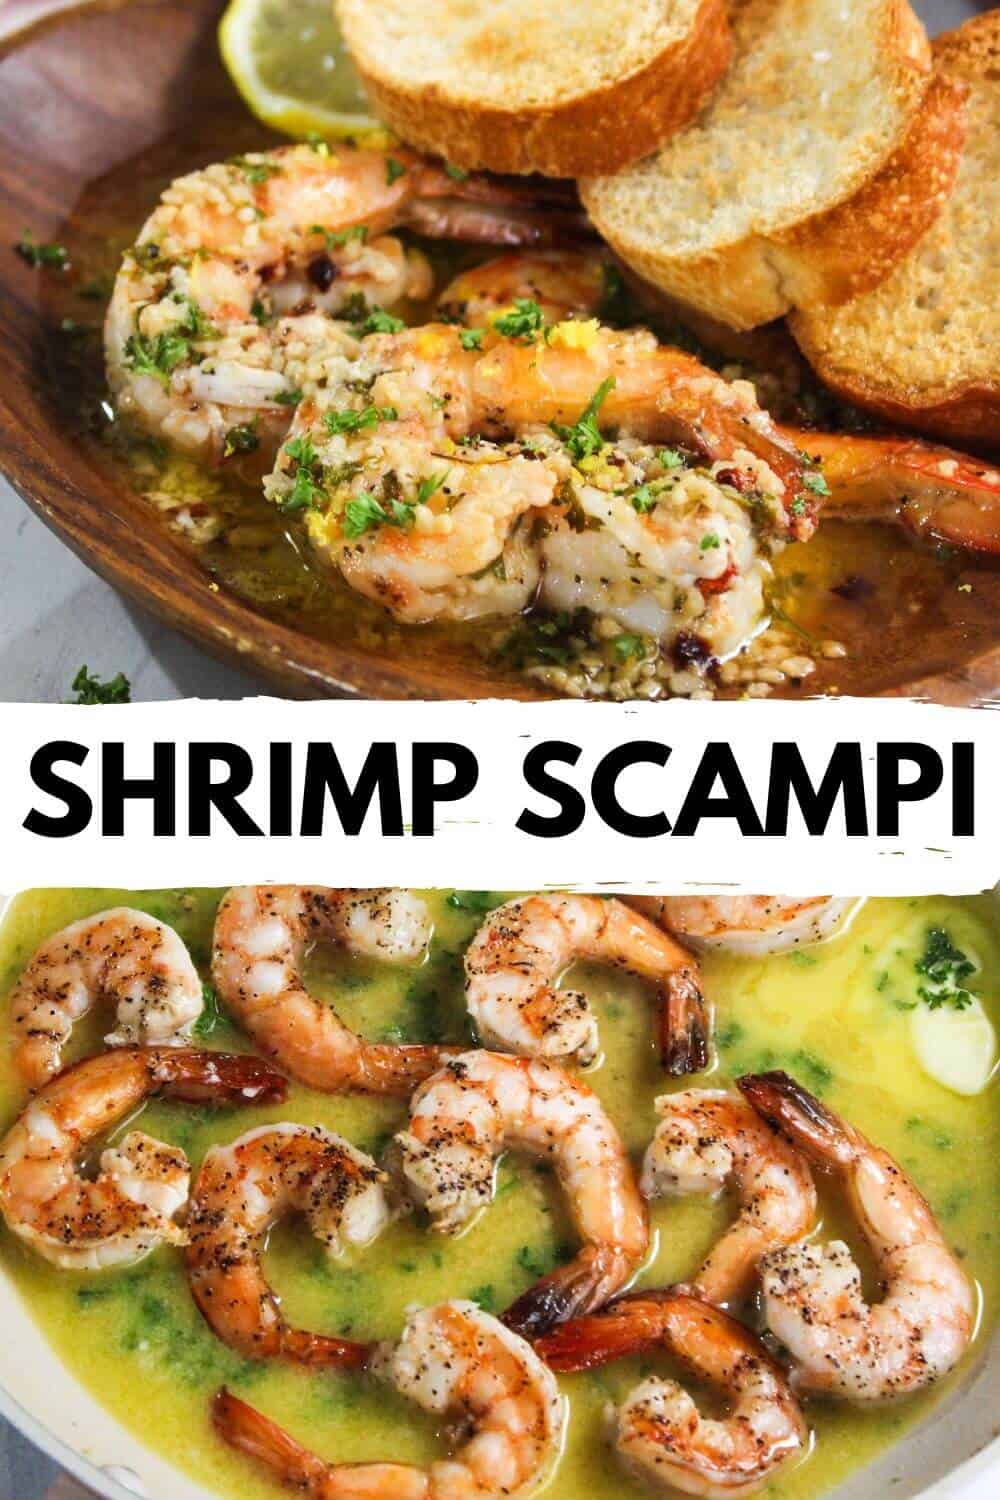 Shrimp scampi with bread and lemon.